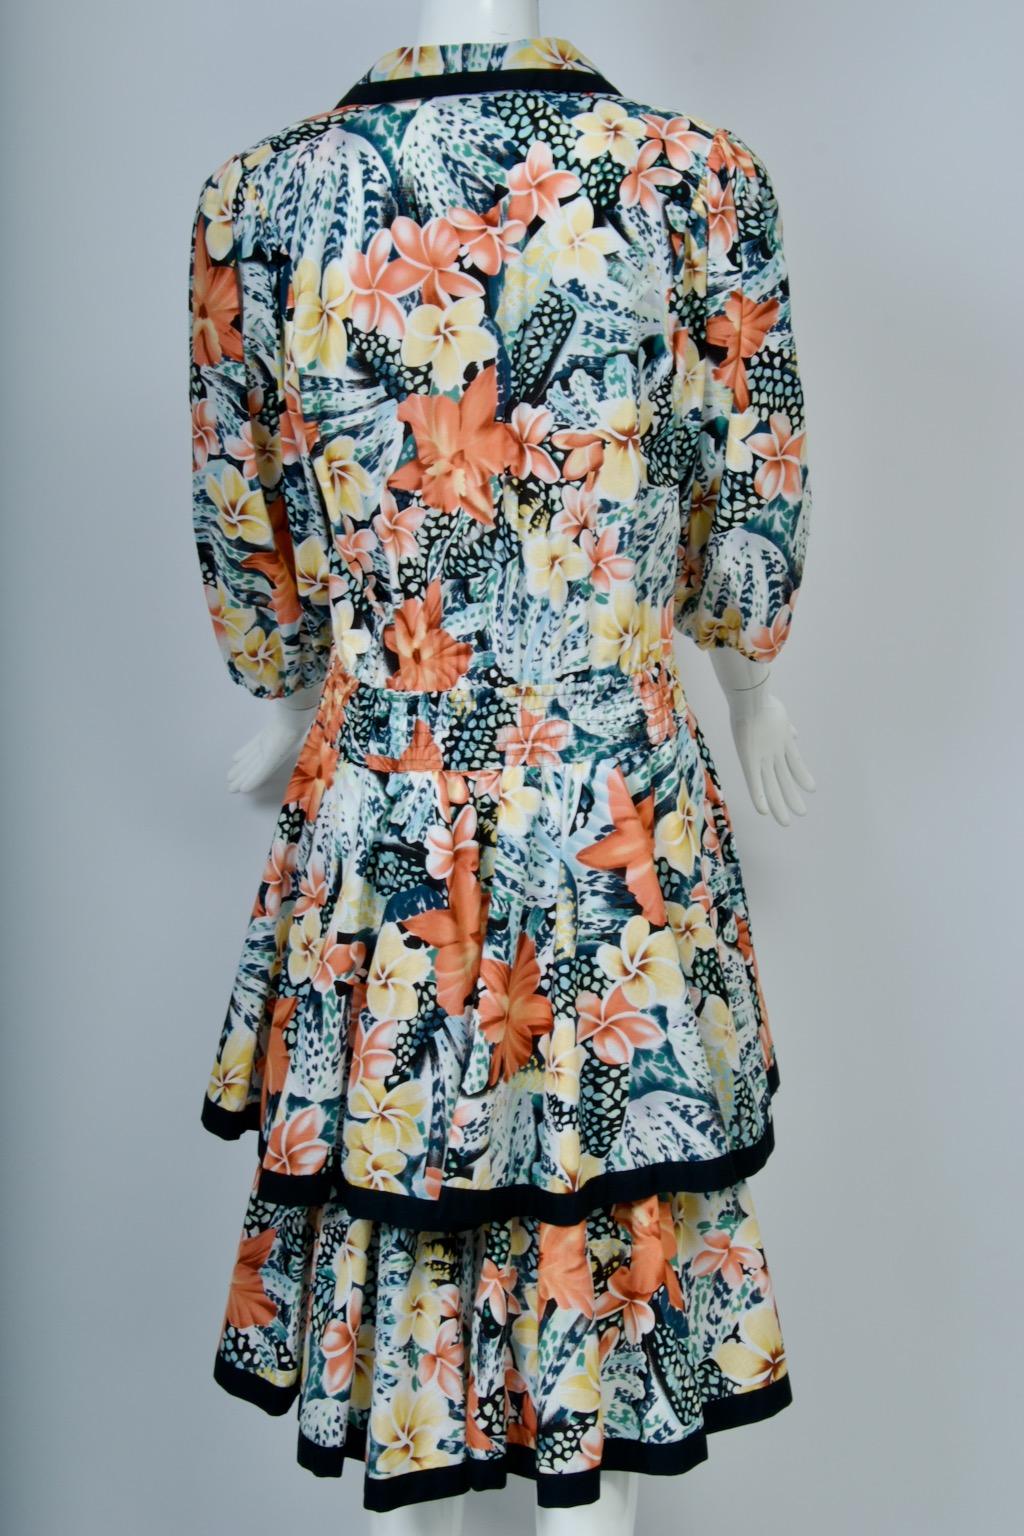 Diane Freis Floral Print Cotton Dress In Good Condition For Sale In Alford, MA